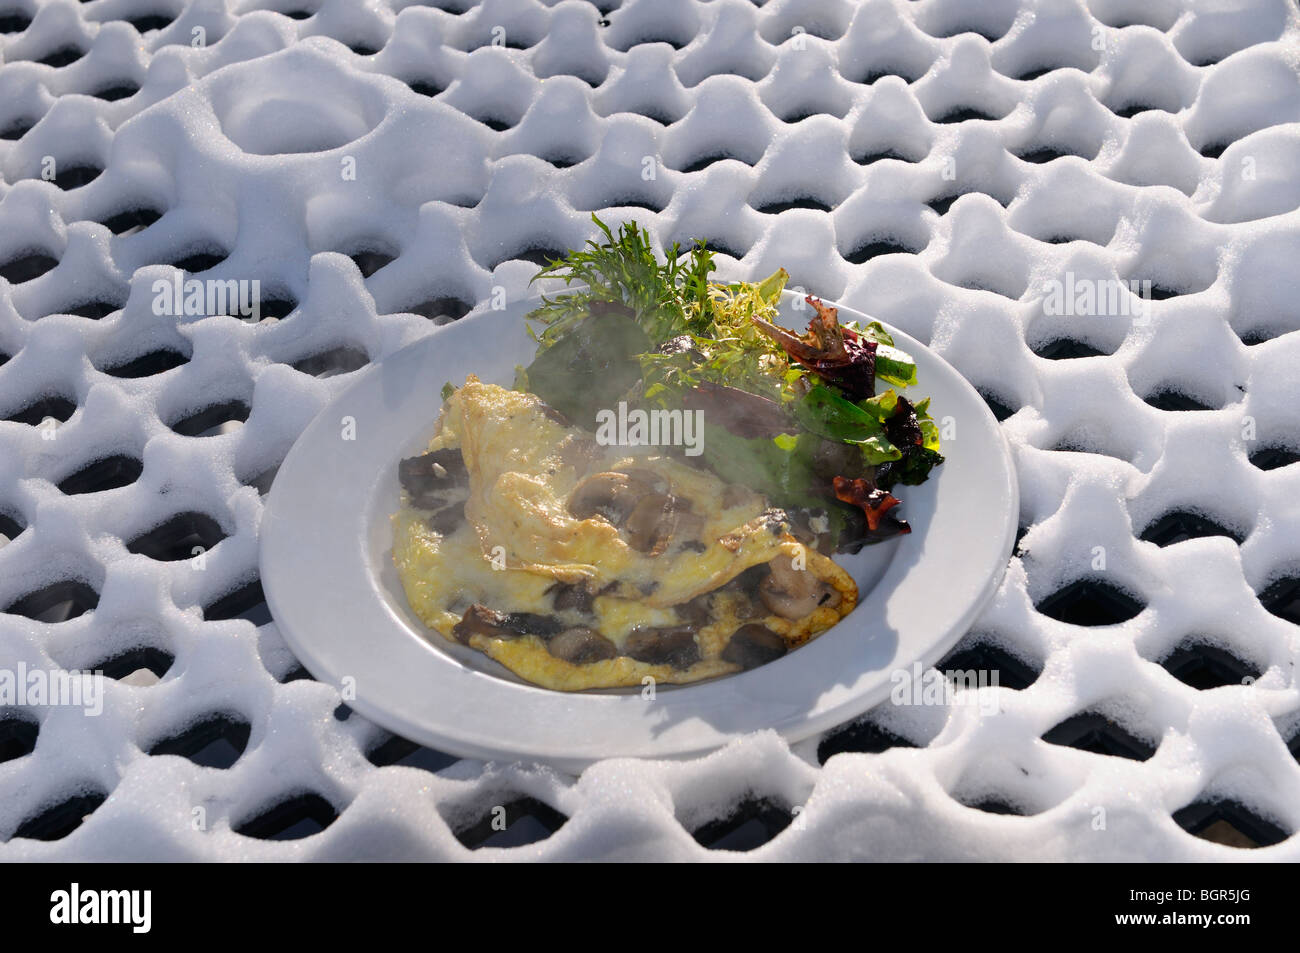 Abstract fresh snow pattern on outdoor patio table with plate of hot omelette and salad at the Rectory on Toronto Island Stock Photo